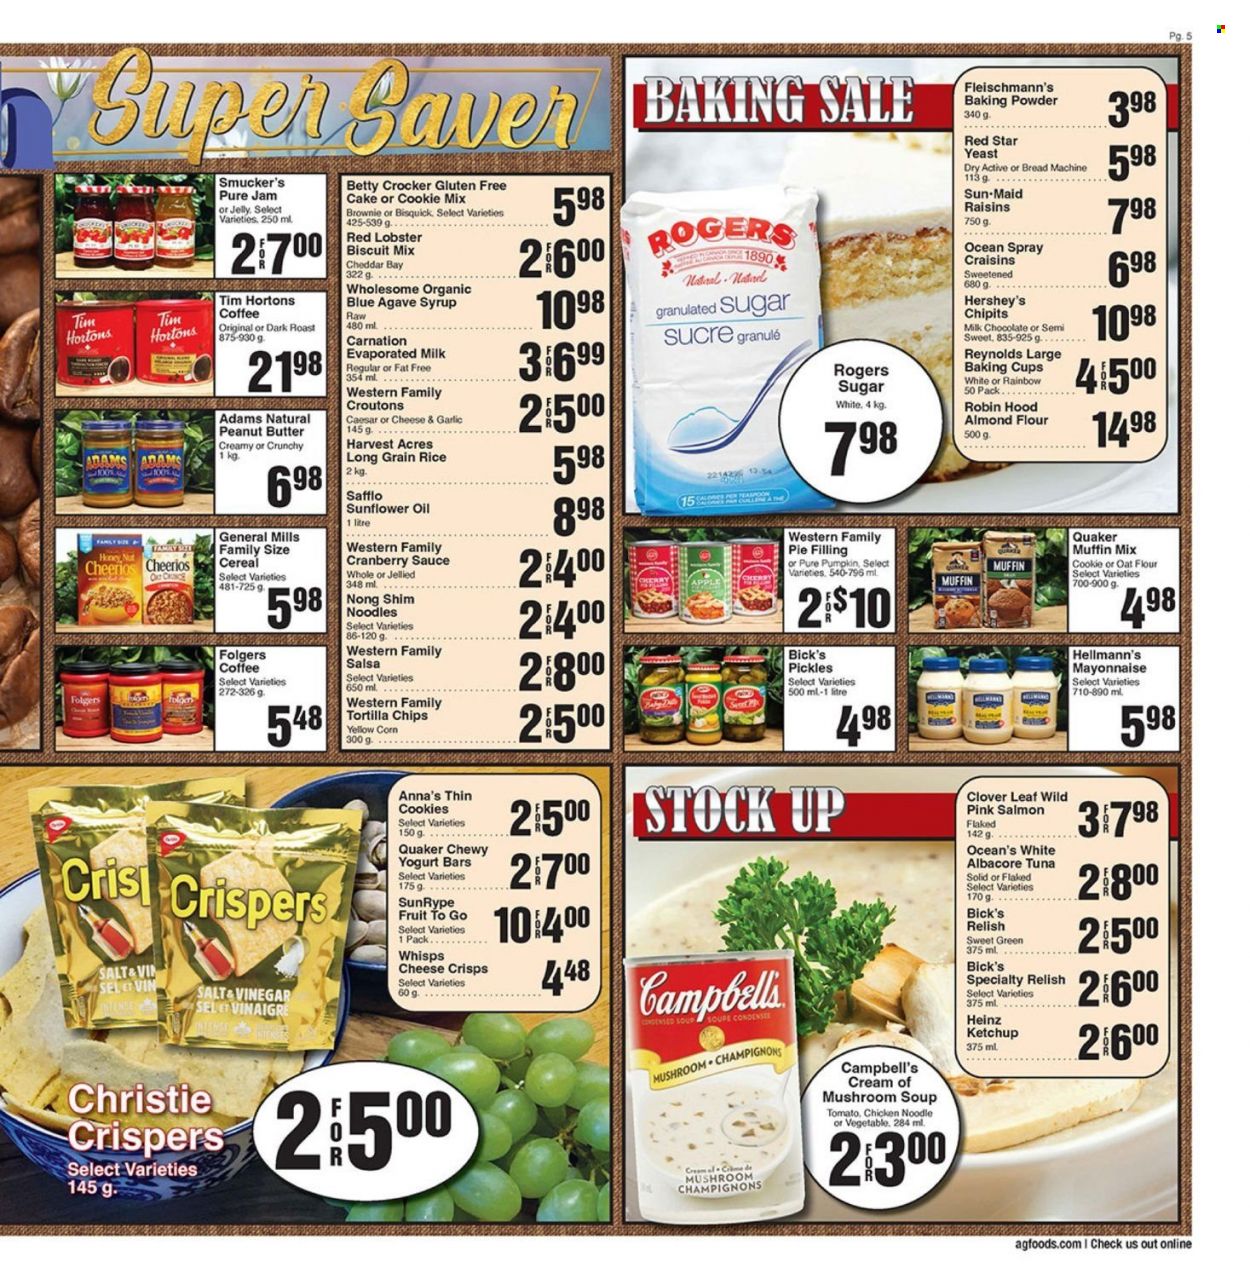 thumbnail - AG Foods Flyer - March 24, 2023 - March 30, 2023 - Sales products - muffin mix, snack, salmon, tuna, Campbell's, mushroom soup, sauce, Quaker, noodles, ready meal, evaporated milk, yeast, mayonnaise, Hellmann’s, Hershey's, milk chocolate, fruit snack, General Mills, tortilla chips, crisps, baking powder, Bisquick, croutons, granulated sugar, sugar, pie filling, almond flour, baking mix, biscuit mix, craisins, pickles, relish, pickled vegetables, Cheerios, long grain rice, ketchup, sunflower oil, oil, cranberry sauce, fruit jam, peanut butter, syrup, jam, raisins, dried fruit, juice, coffee, Folgers, Heinz. Page 5.